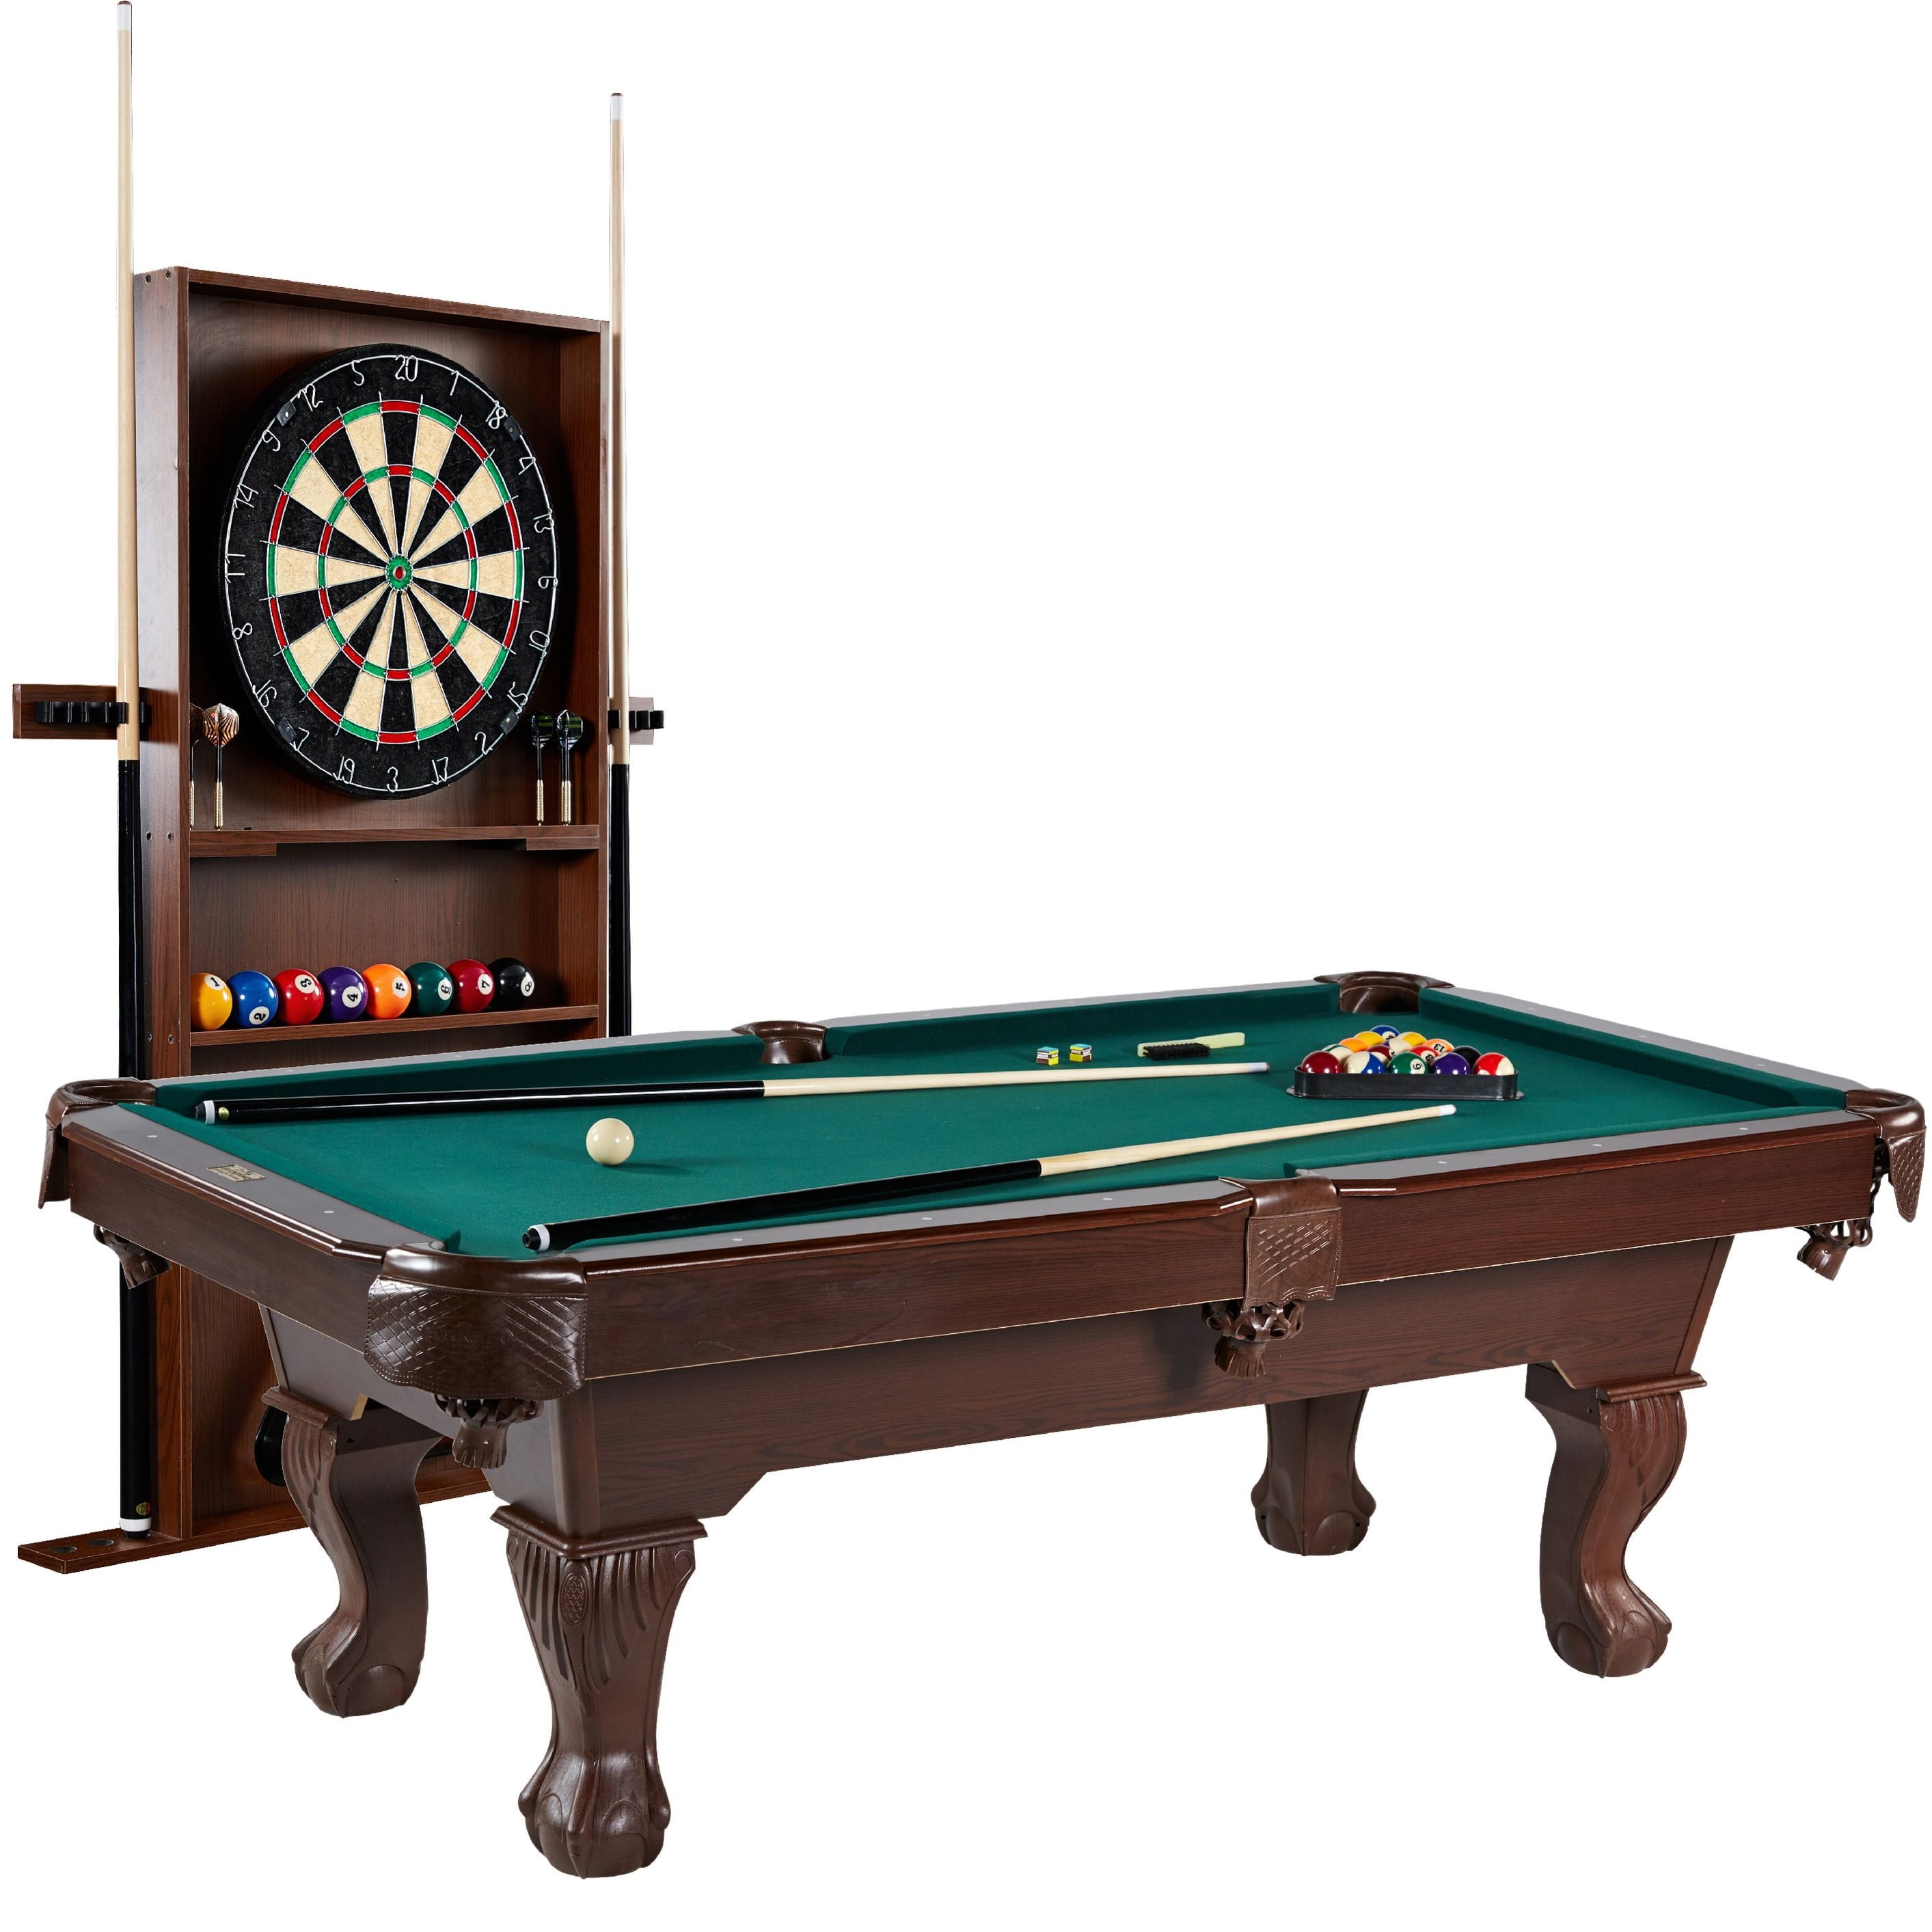 charles hernandez recommends Pool Table Pics